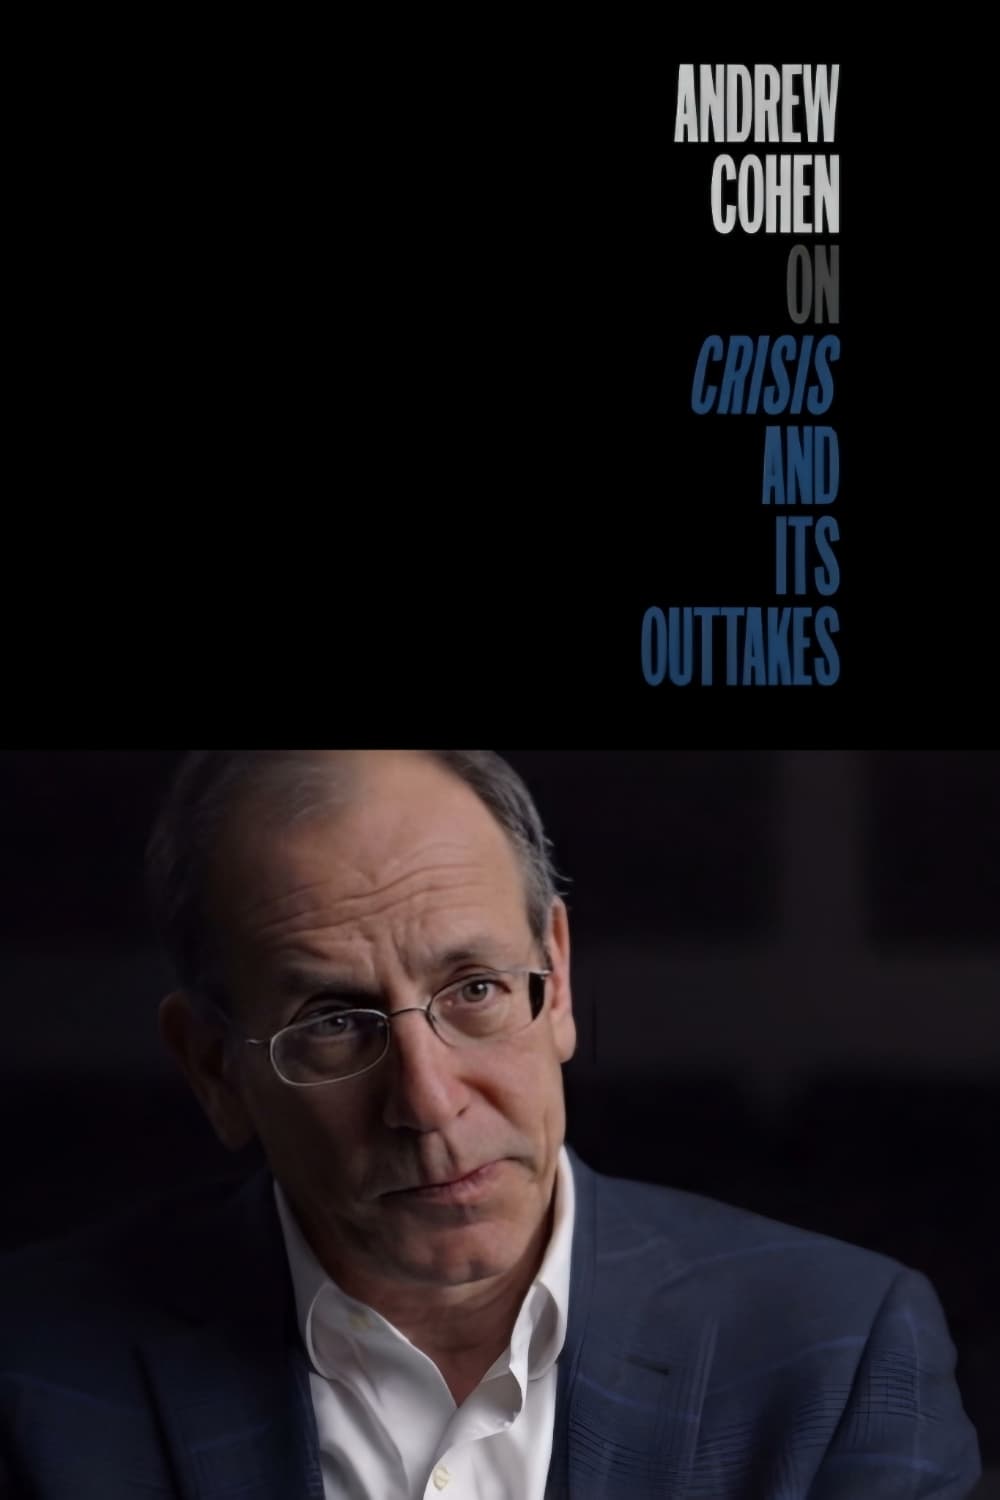 Andrew Cohen on Crisis and Its Outtakes